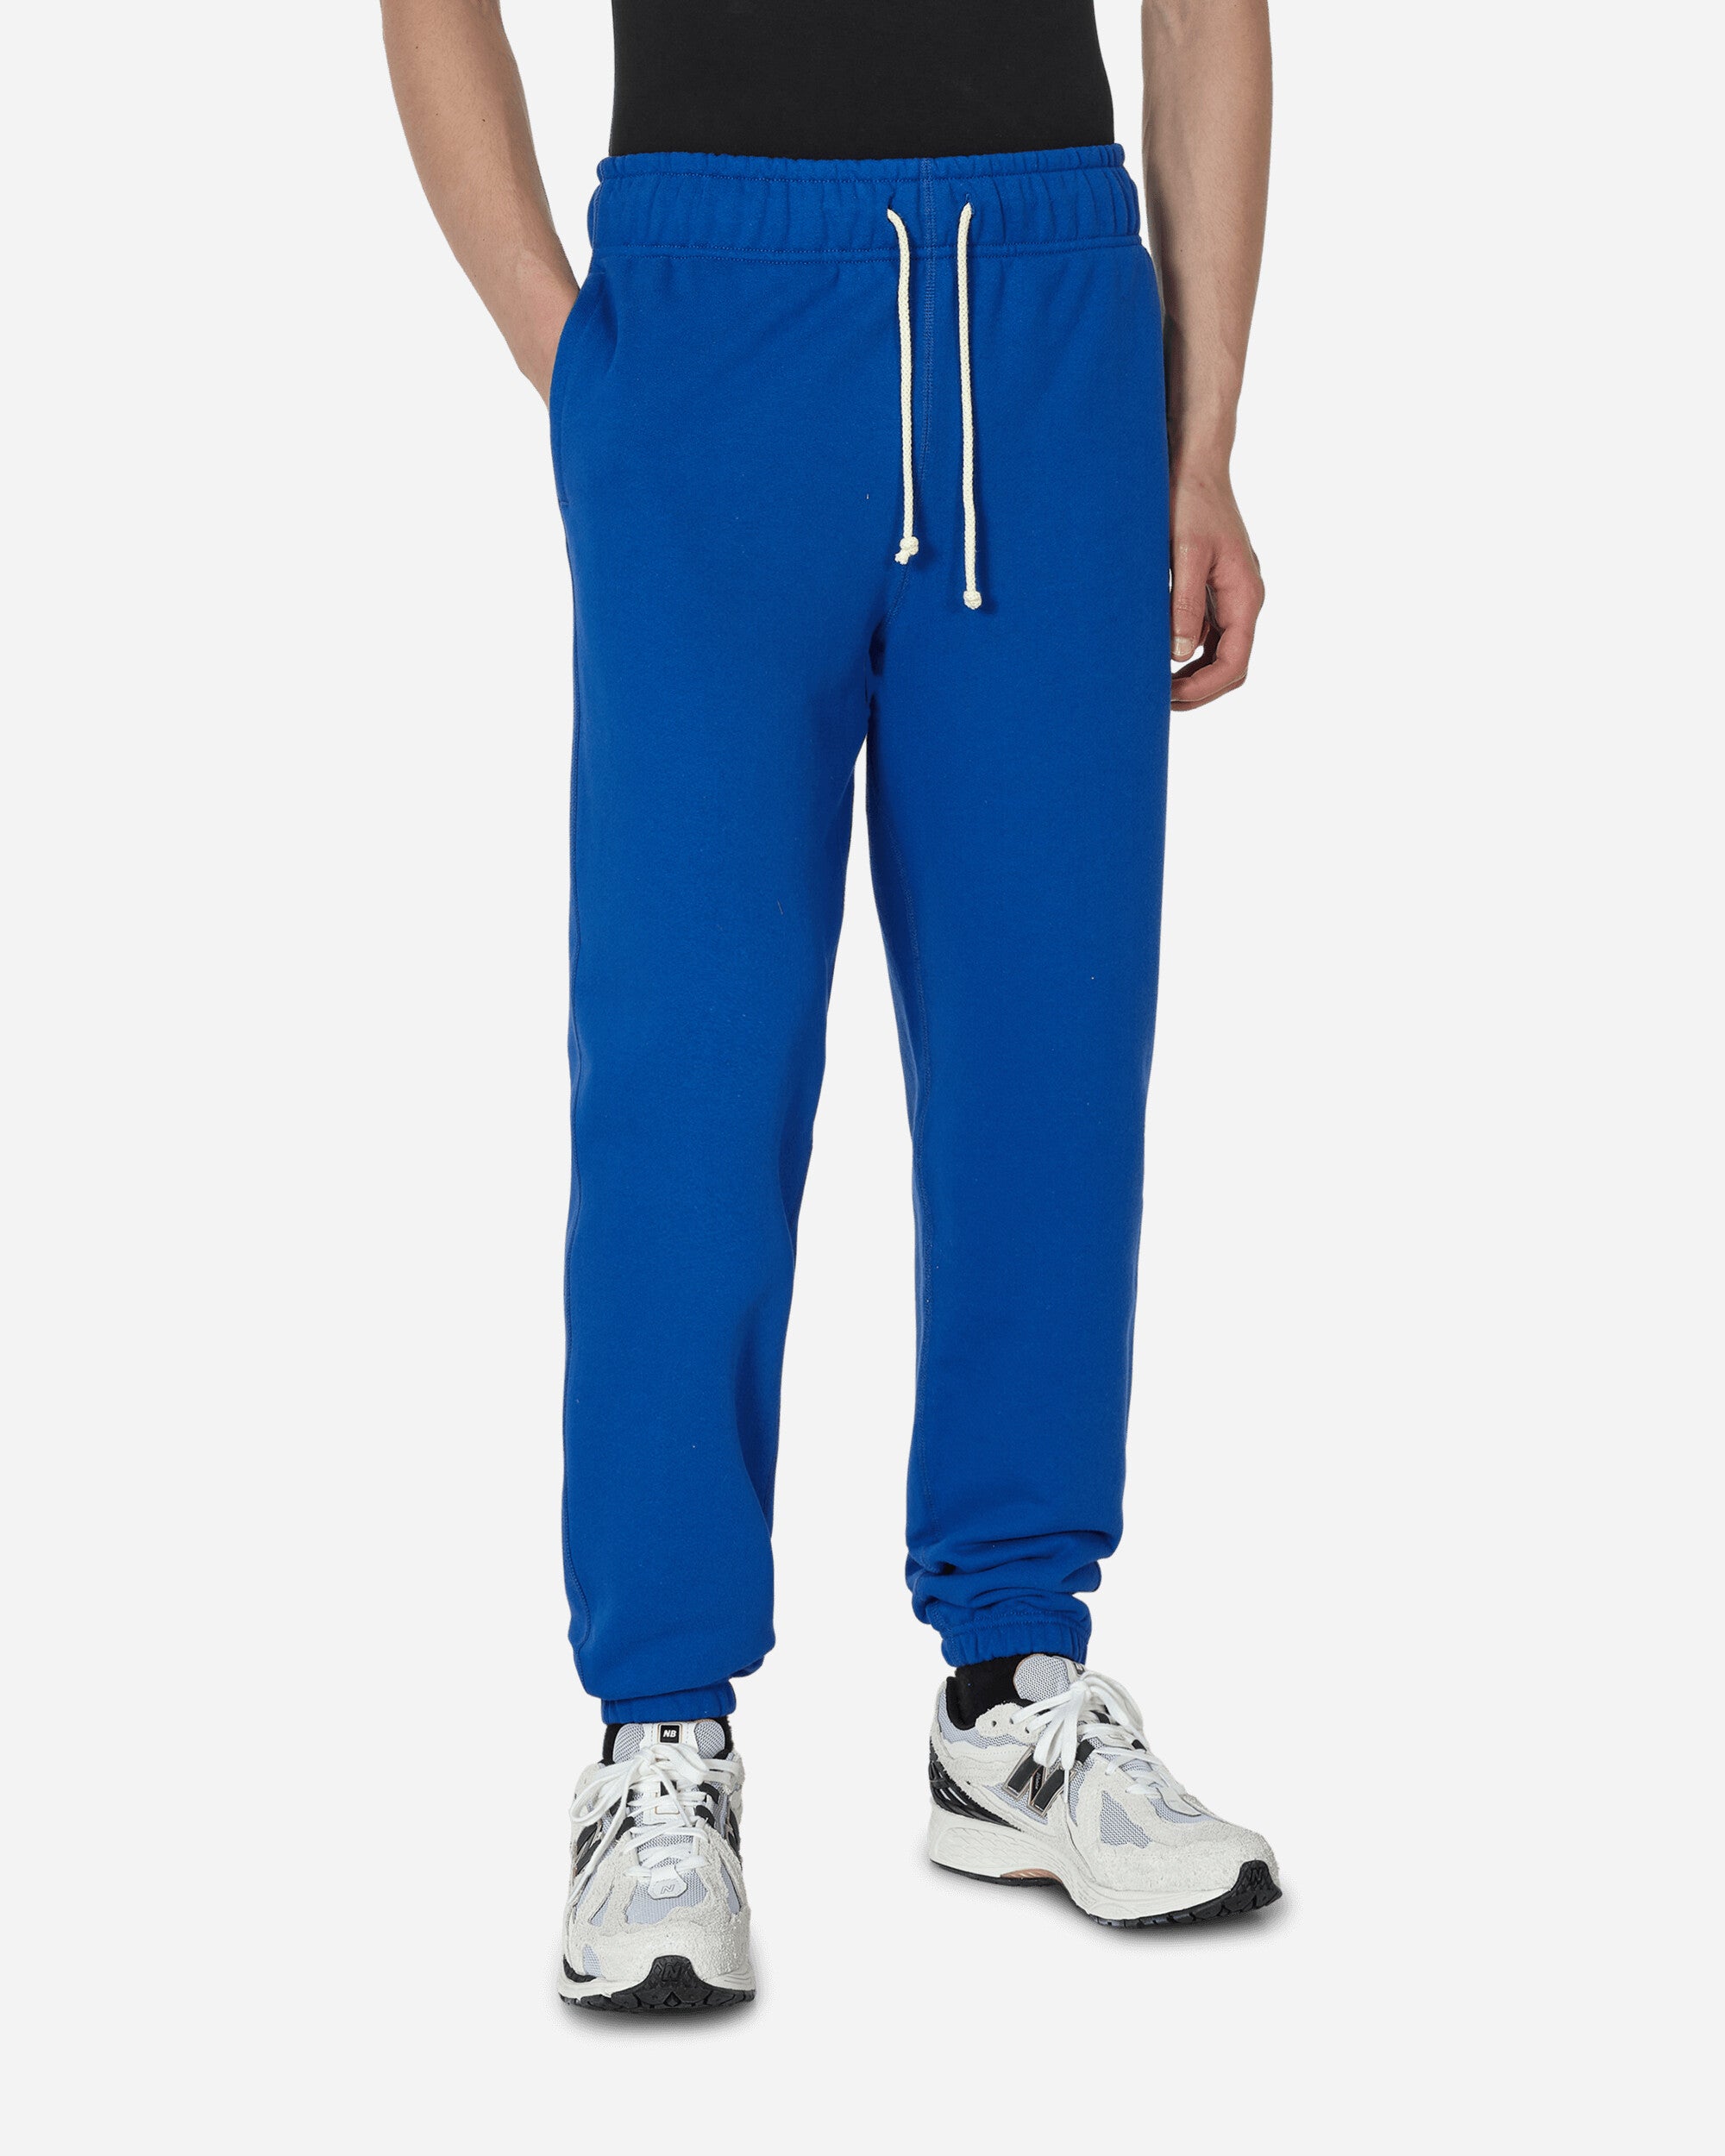 New Balance MADE in USA Core Sweatpants Royal Blue - Slam Jam Official ...